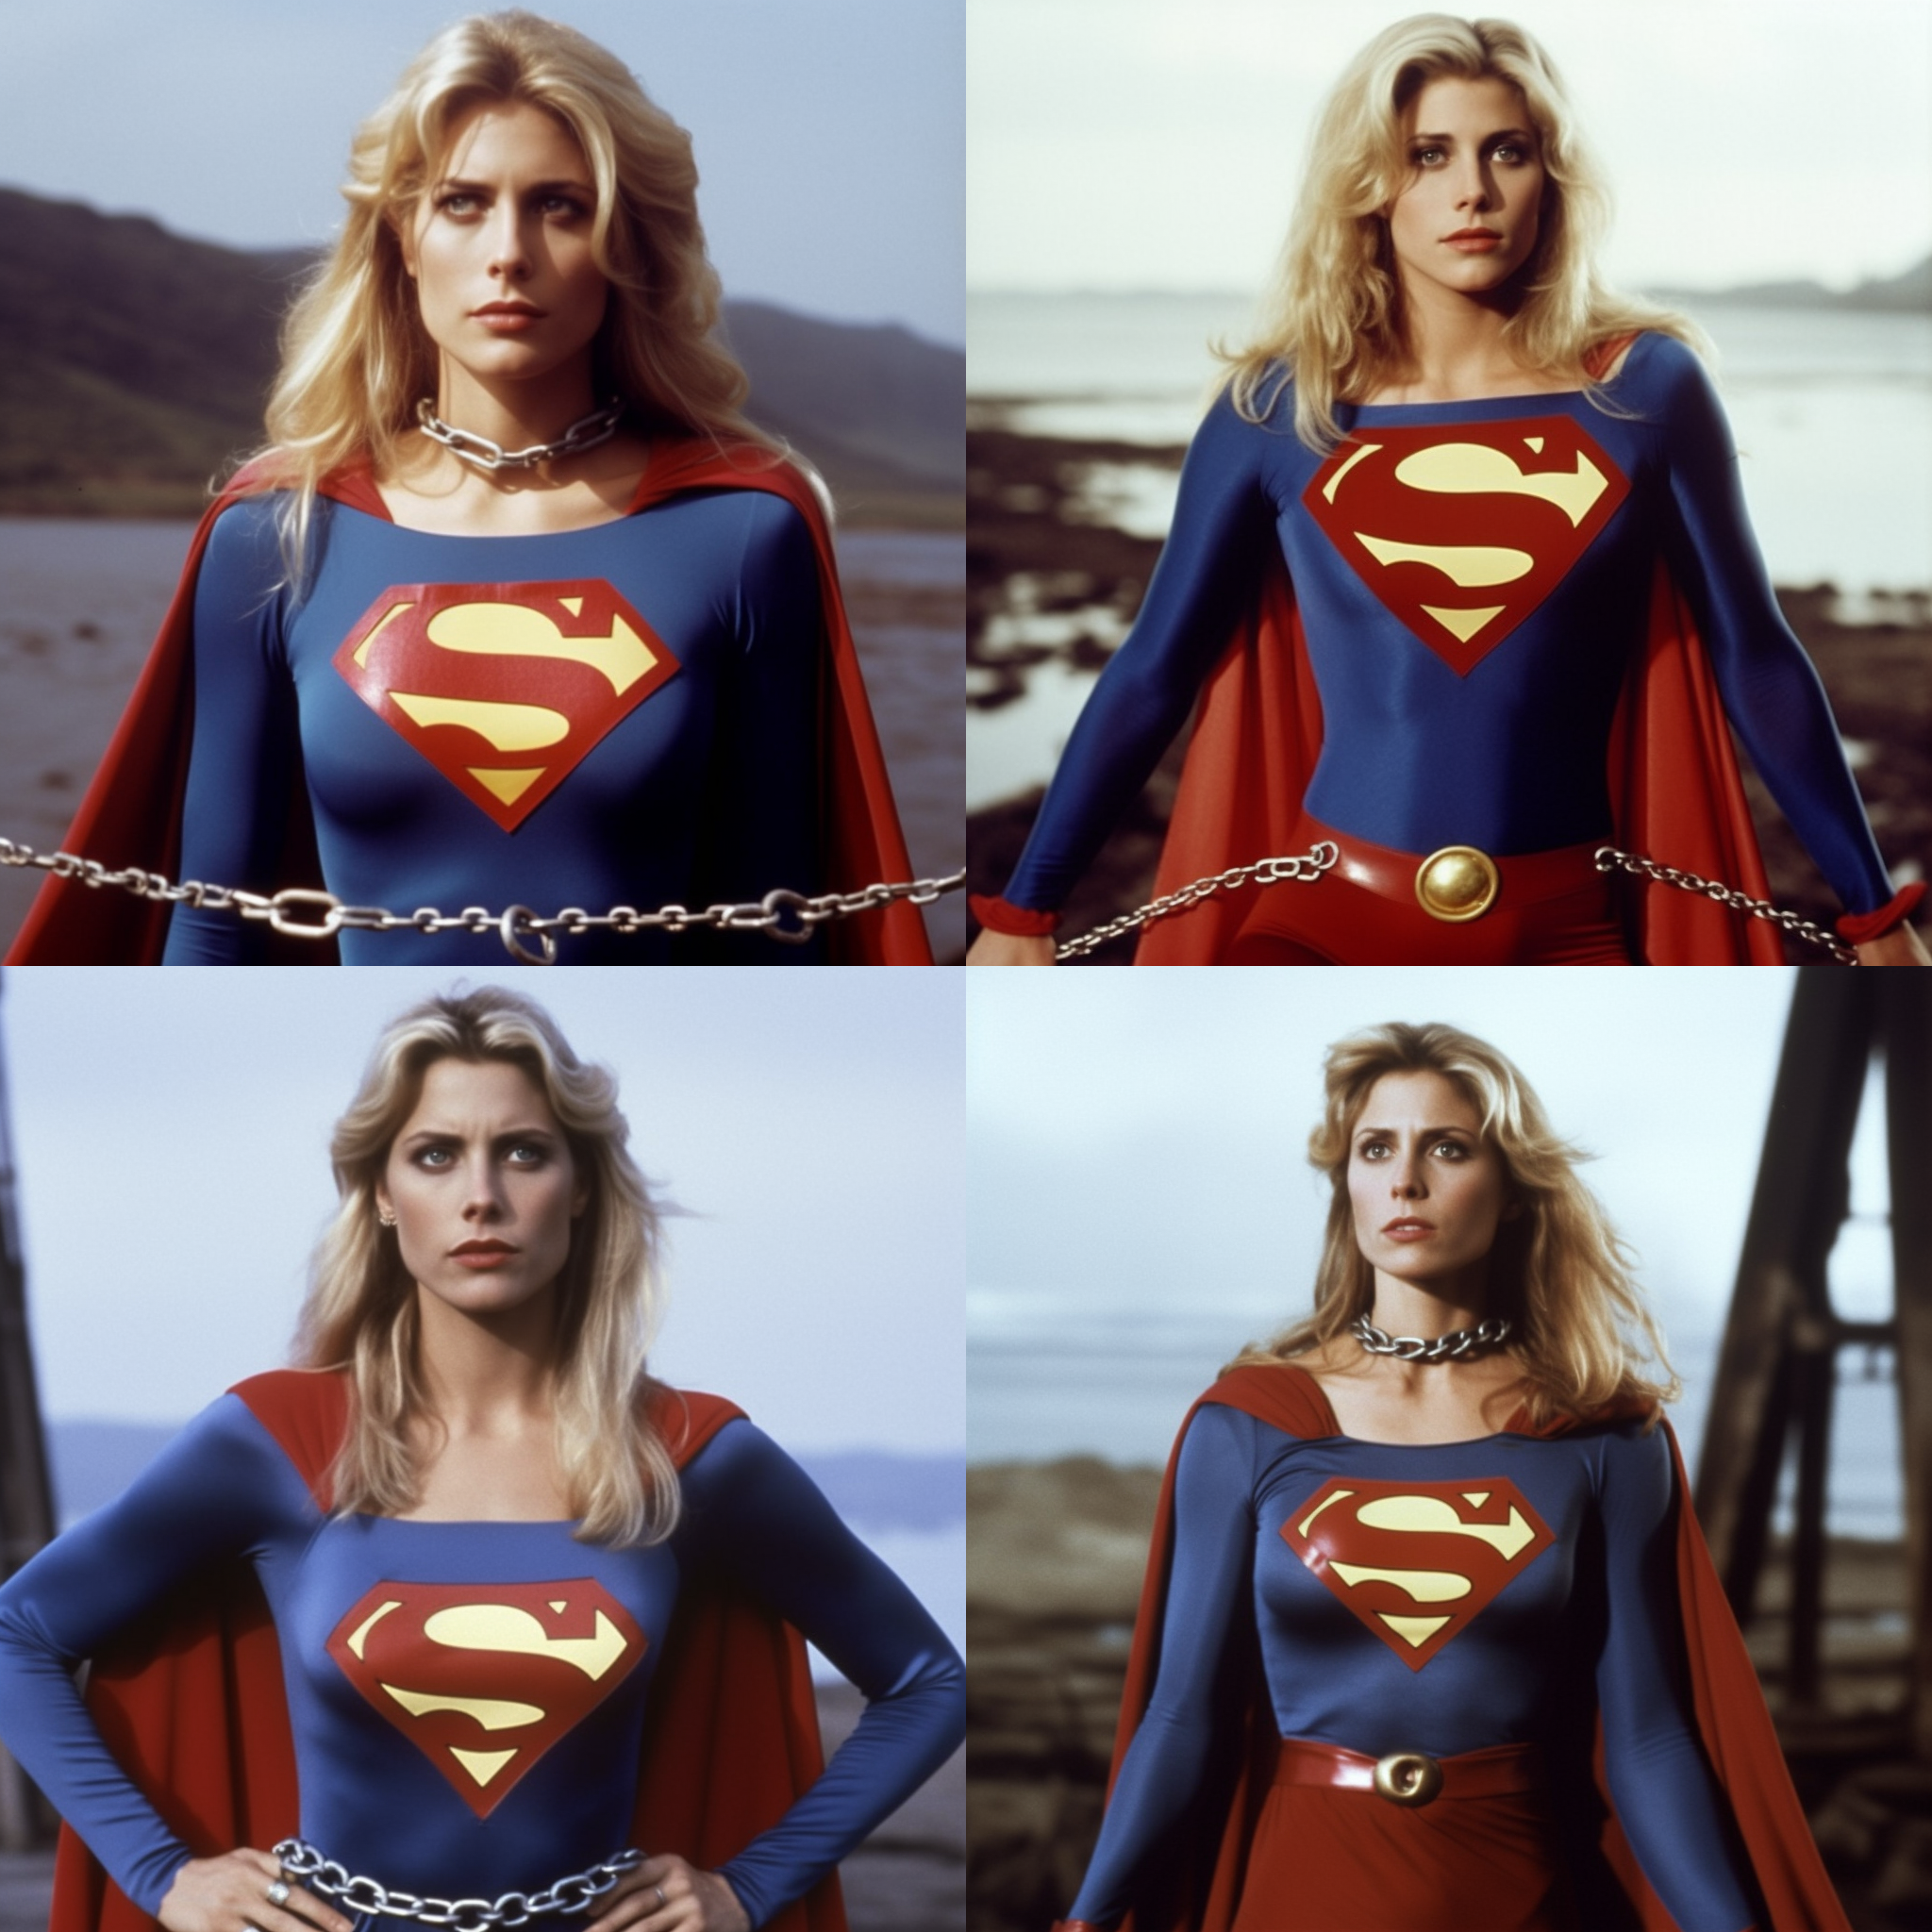 Sir_Frogdick_Supergirl_trapped_in_chains_Helen_Slater_as_Superg_fd30f677-4e95-44e8-b6f9-07a551a4ea5c.png